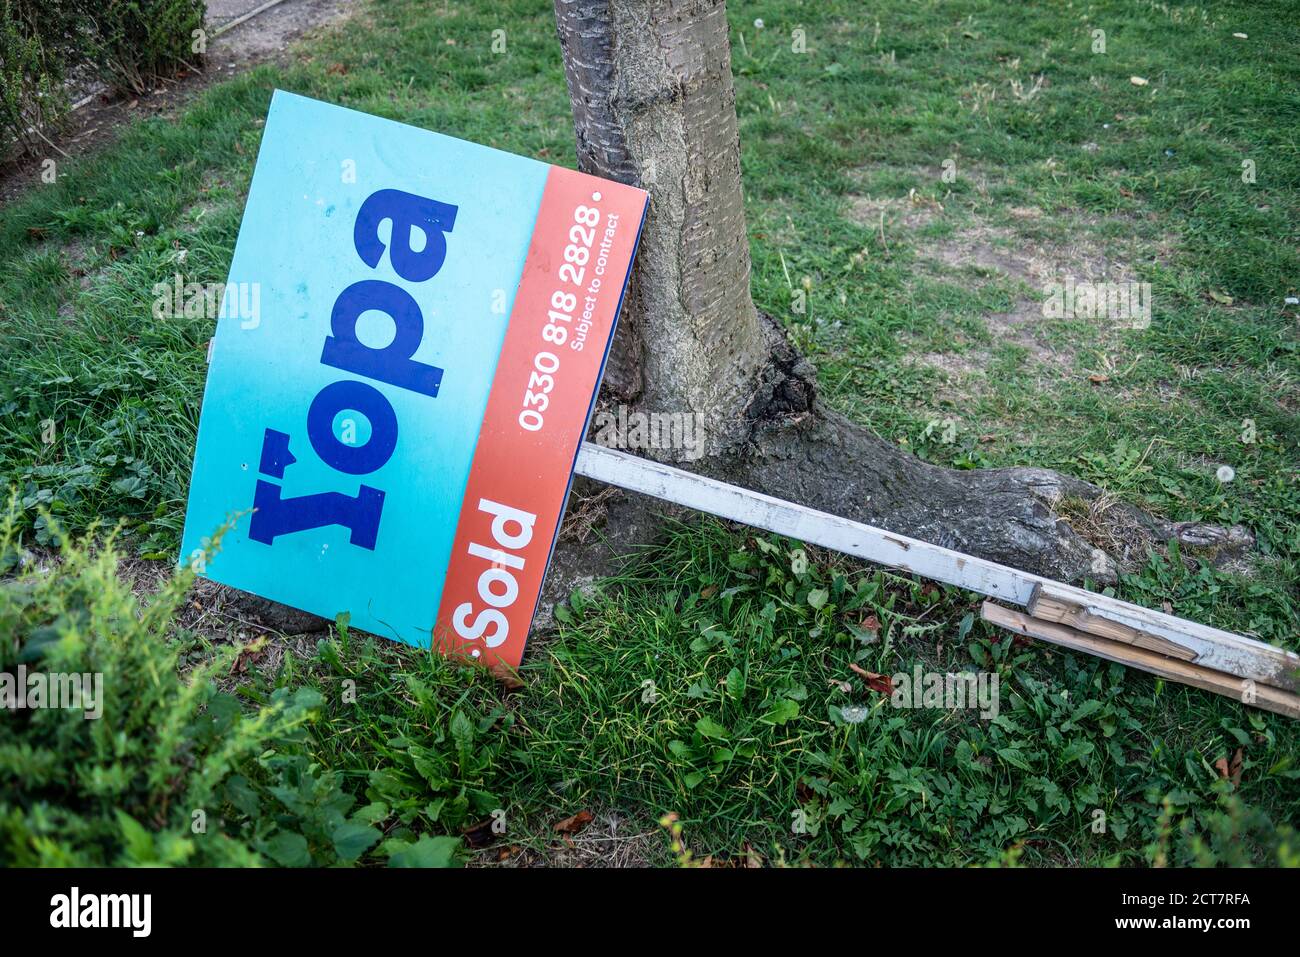 Yopa estate agency sold sign board dumped on ground, in Southend on Sea, Essex, UK. Online internet estate agent. Falling property market Stock Photo